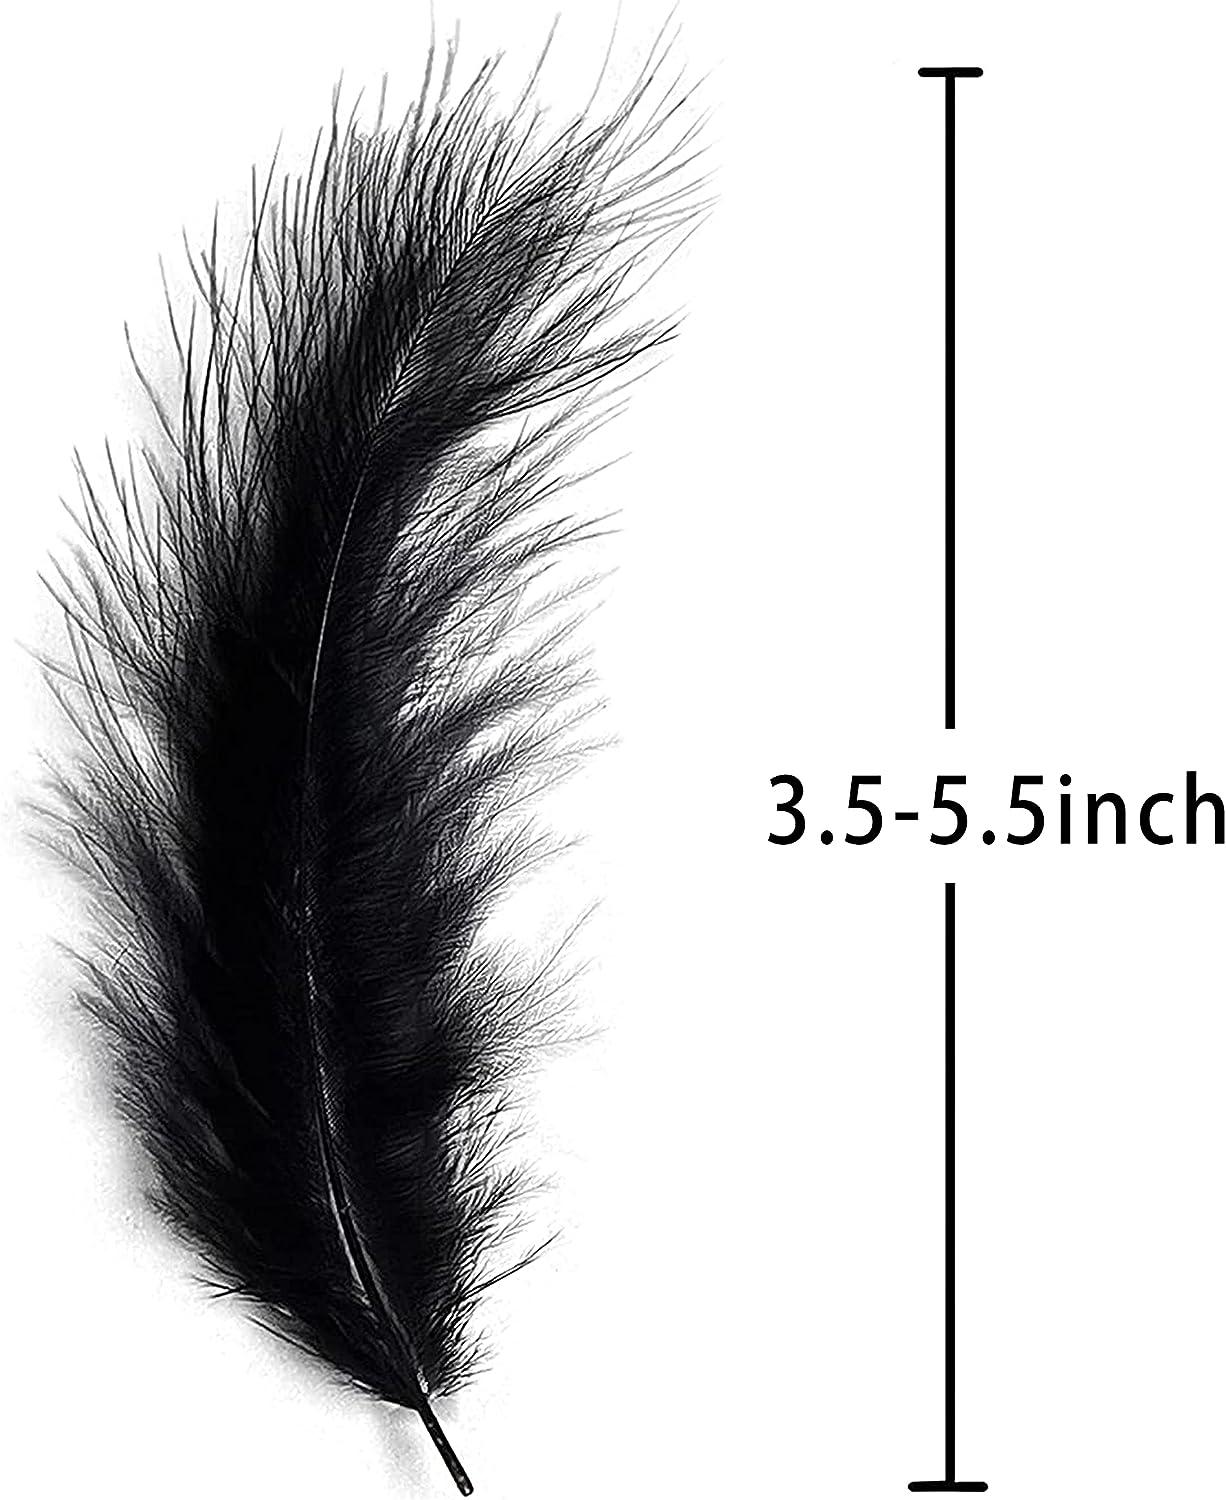  100pcs Black Fluffy Turkey Marabou Feathers 4-6 Inches for  Crafts Dream Catcher Fringe Trim Colored Feathers Fly Tying Material :  Arts, Crafts & Sewing